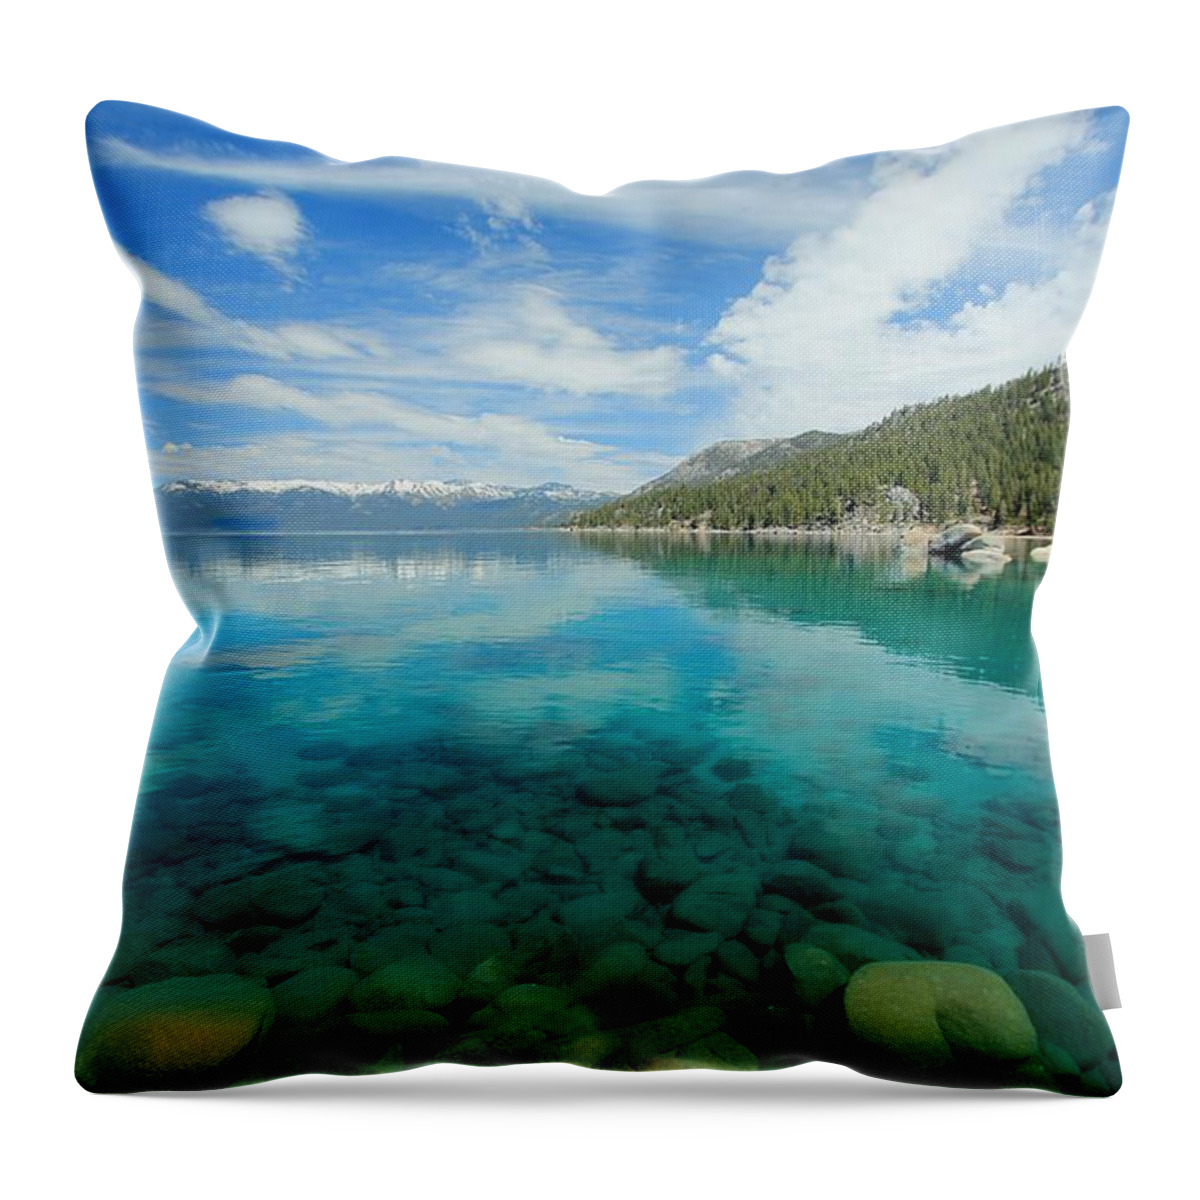 Lake Tahoe Throw Pillow featuring the photograph Soulseeker by Sean Sarsfield